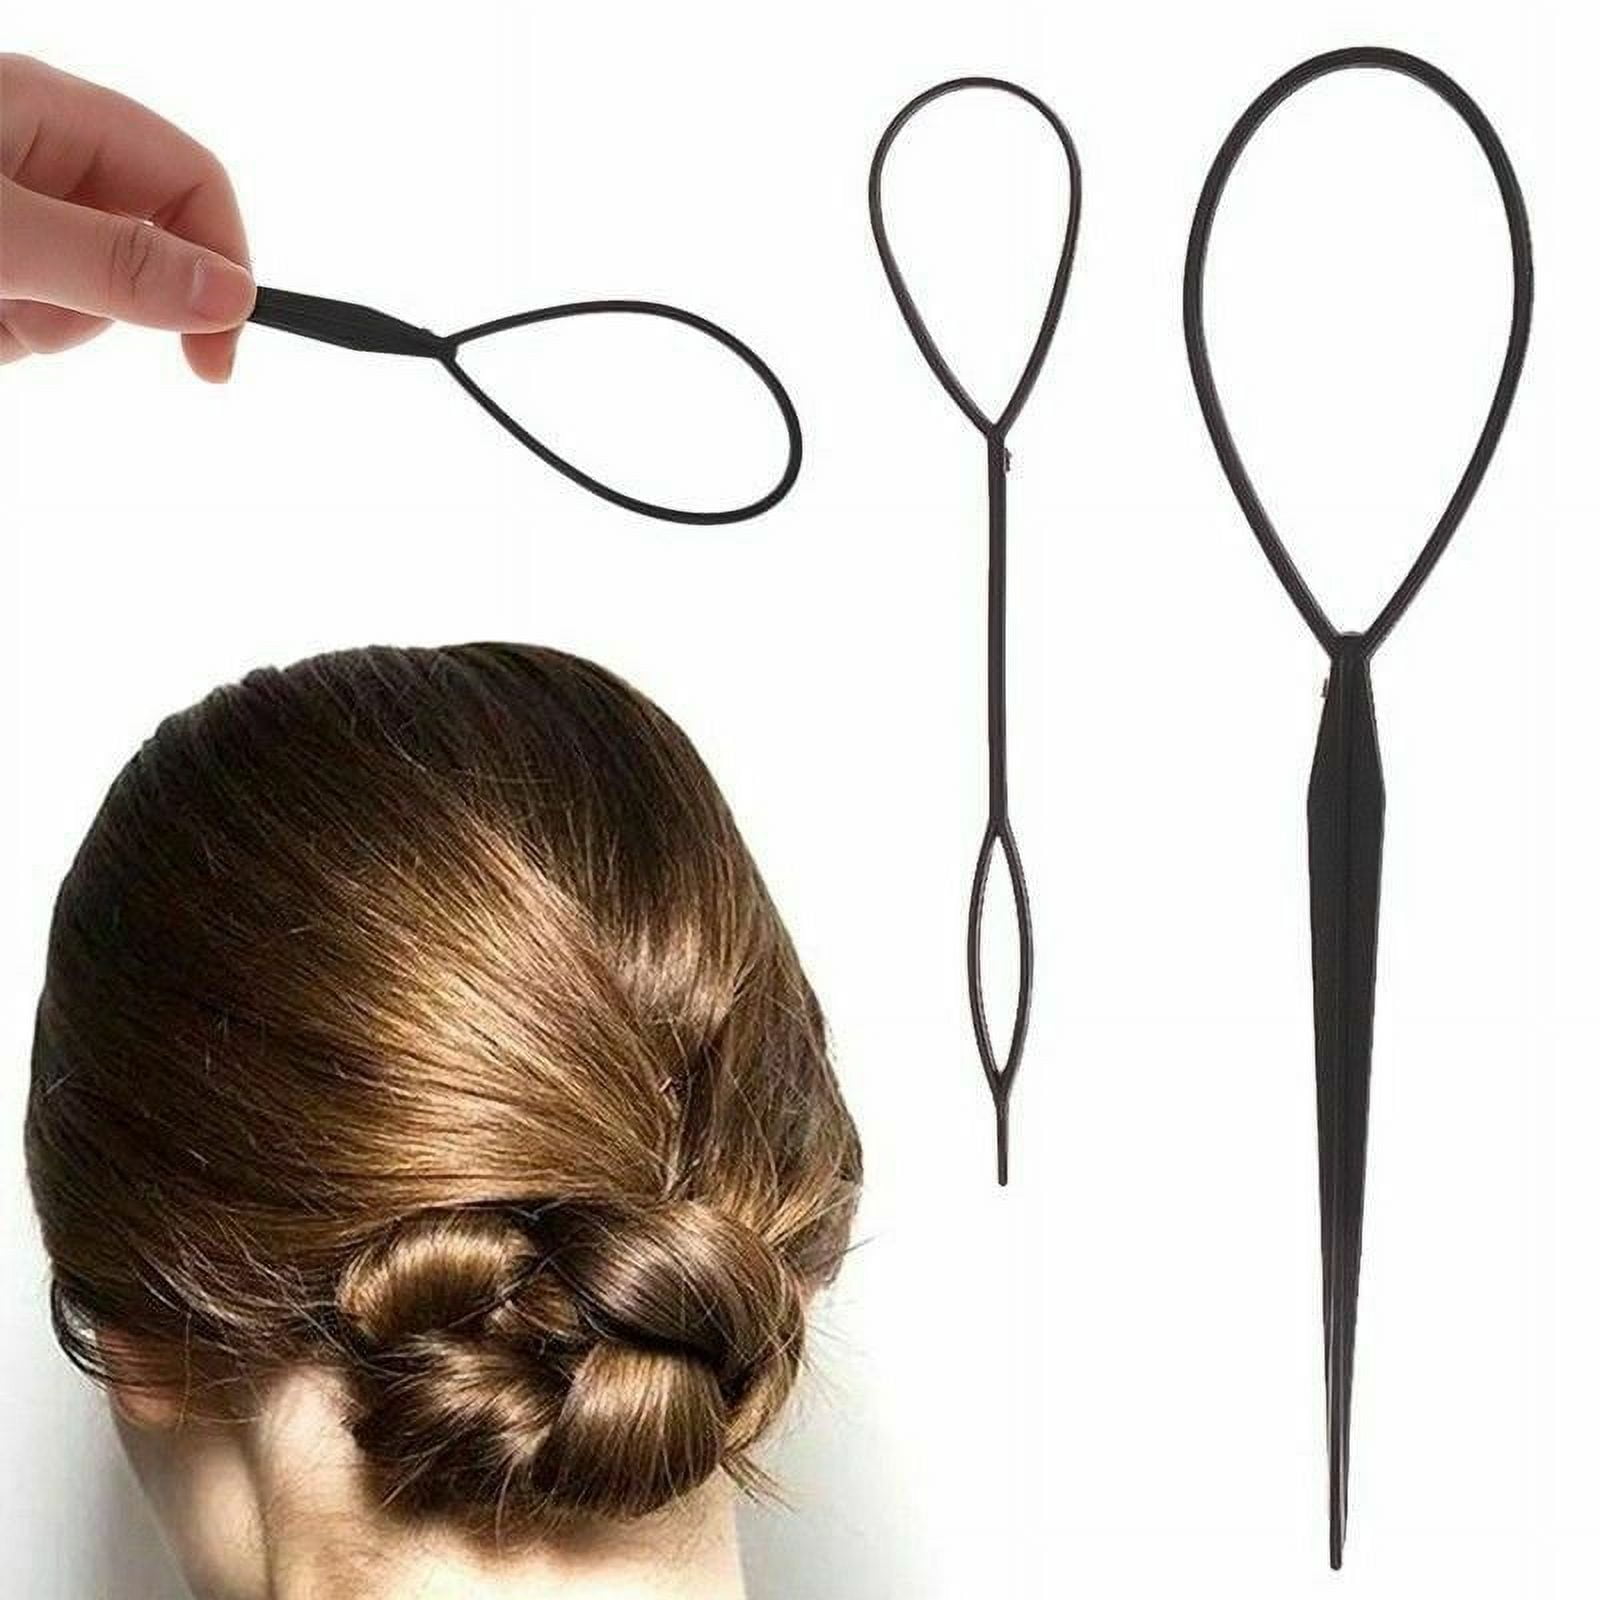 ericotry 2Pcs(Large+Small) Hair Braiding Tool Ponytail Styling Maker French  Braid Loop Tool for Women (Black)